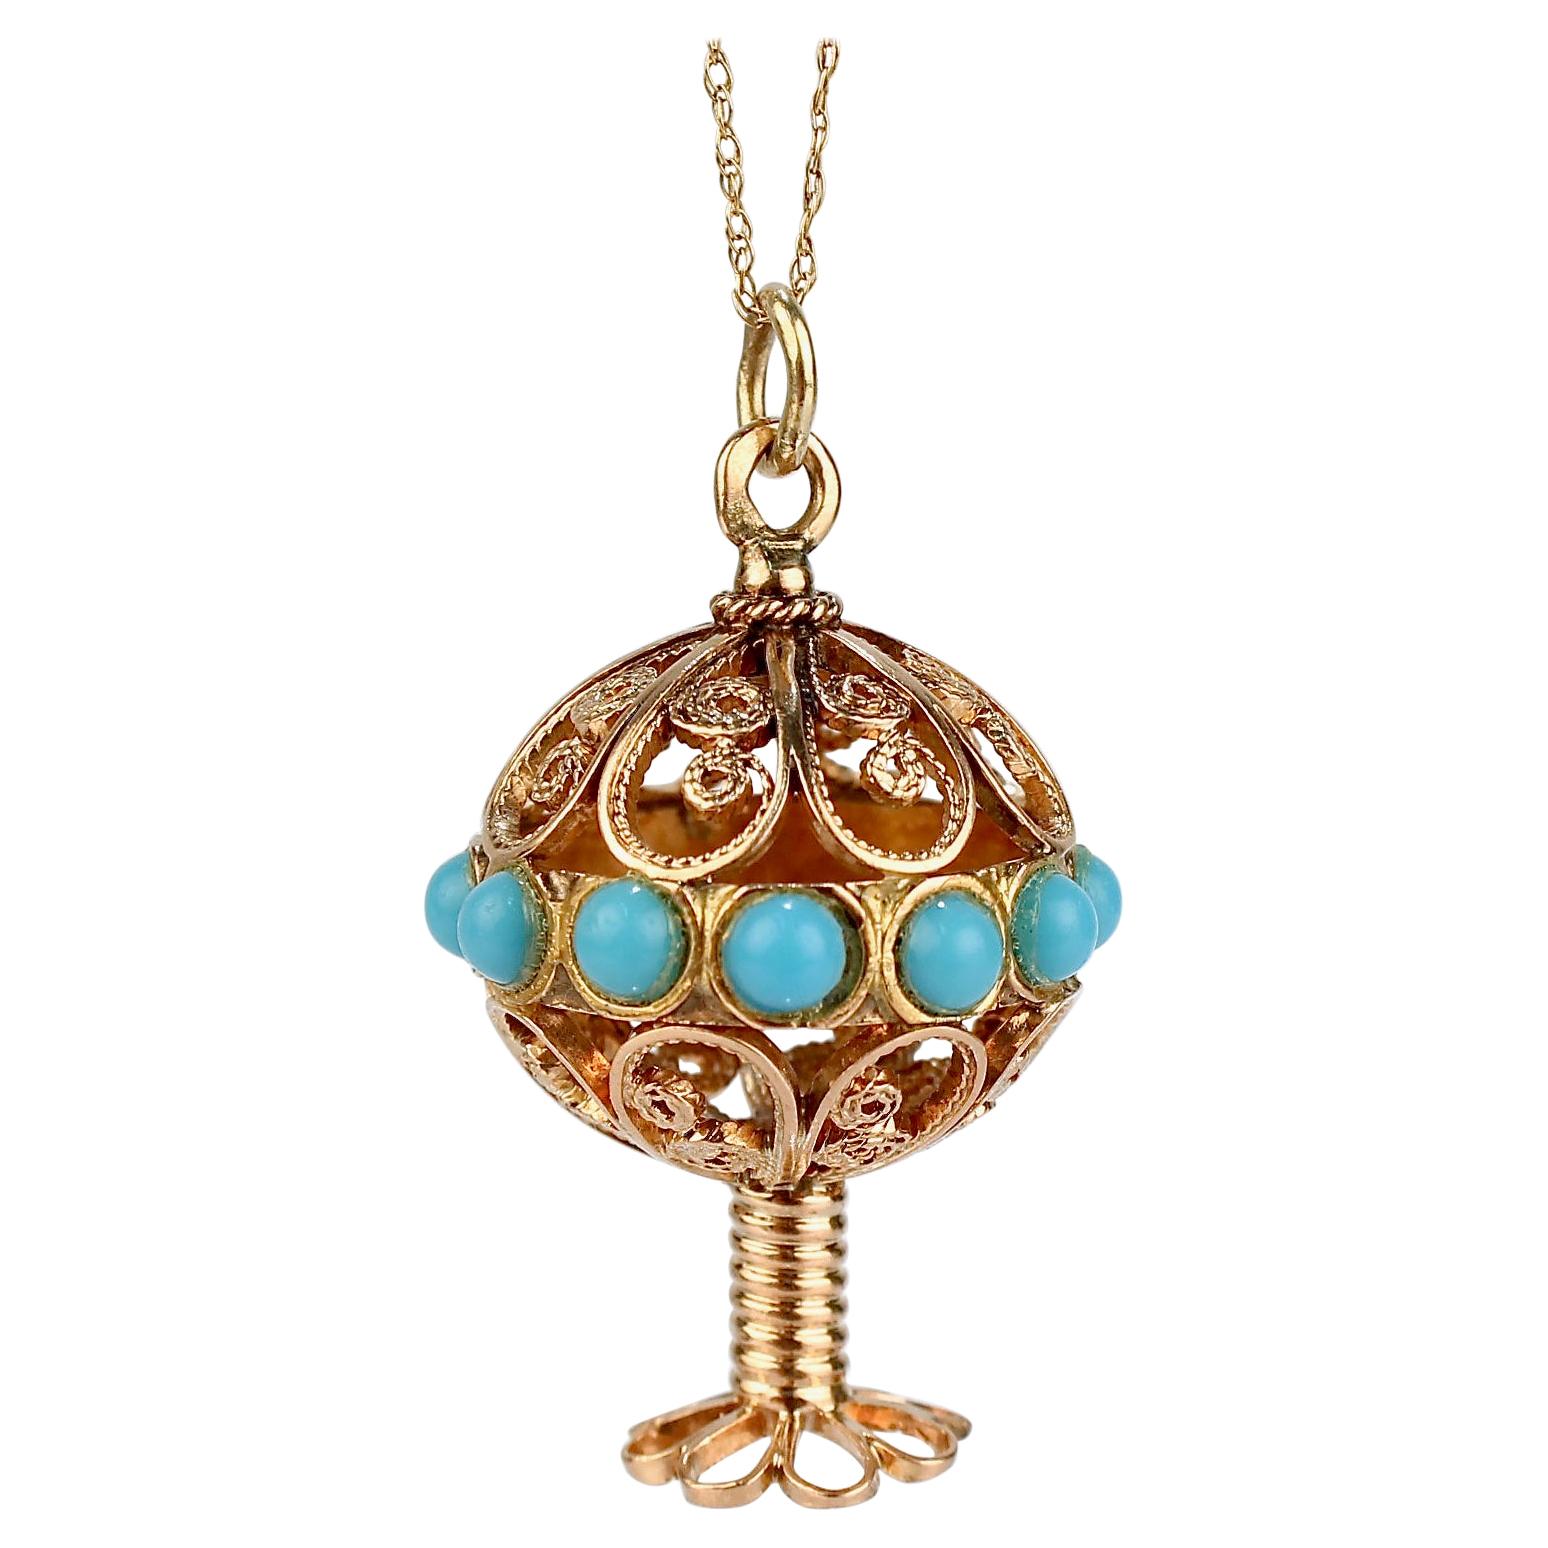 Vintage Etruscan Revival Style 18k Gold & Turquoise Charm or Pendant